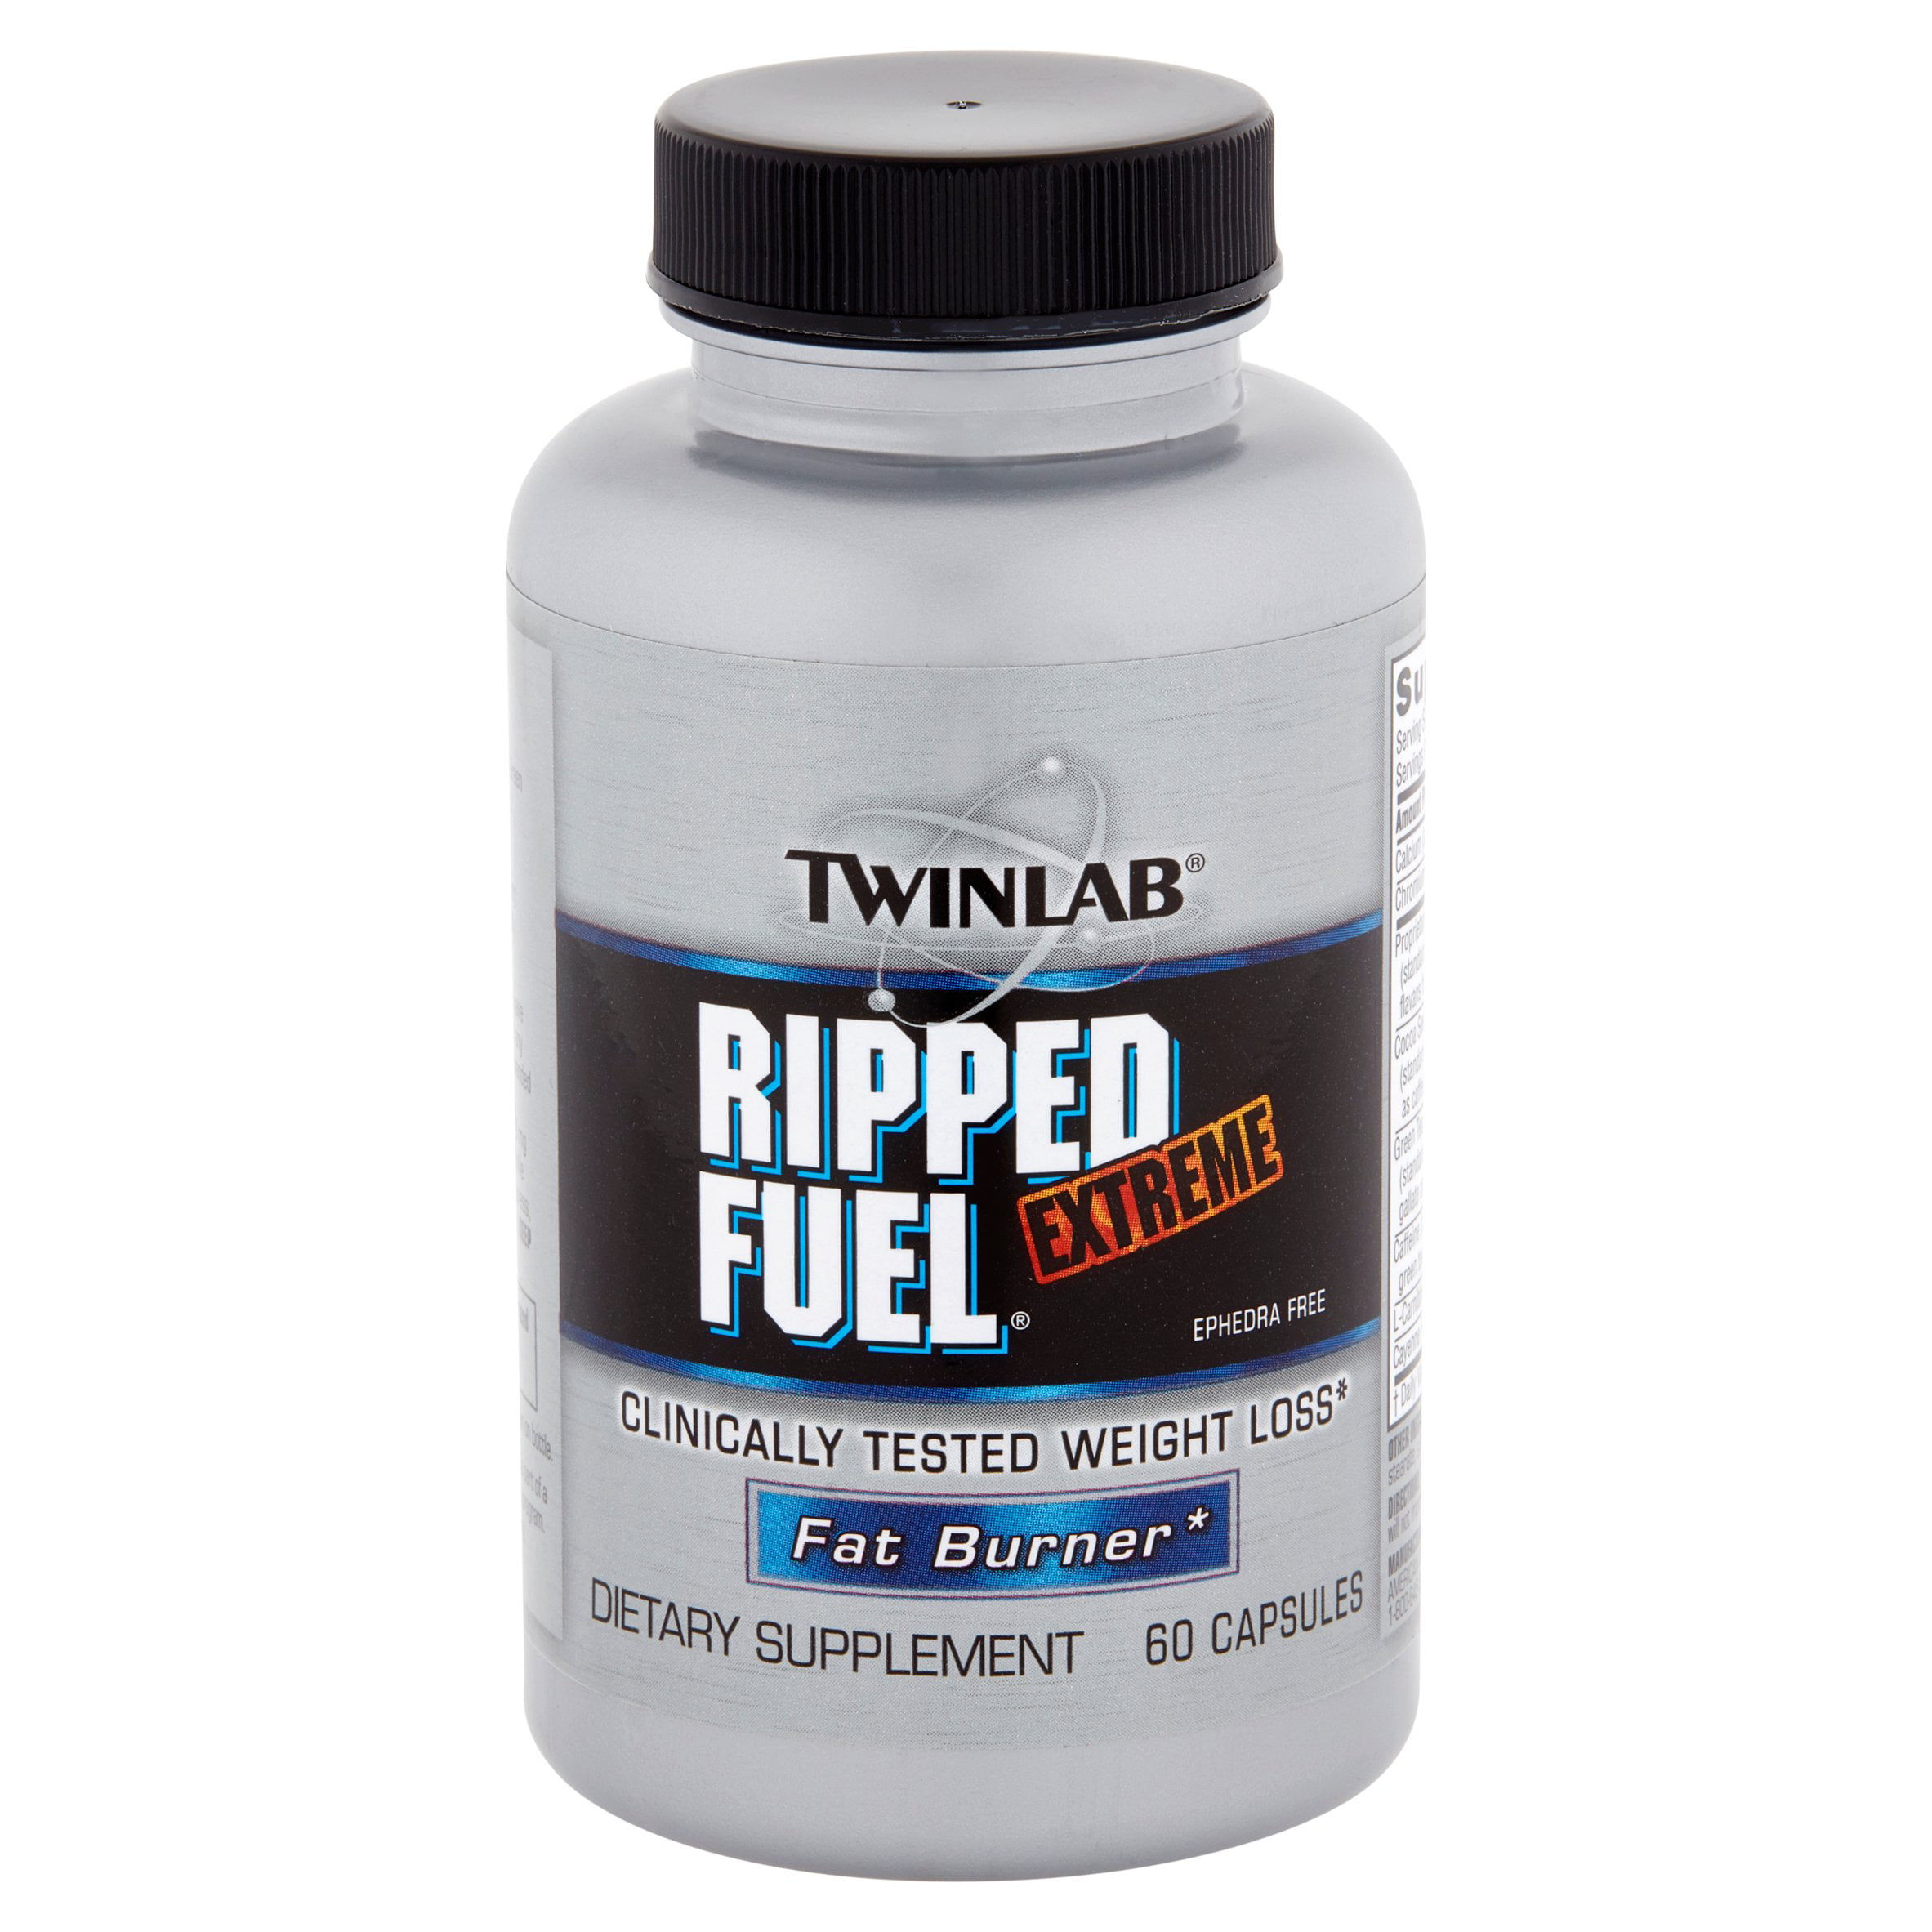 Twinlab Ripped Fuel Extreme Ephedra Free Weight Loss Supplement, Dietary  Supplements, 220 mg Caffeine, 60 Count 